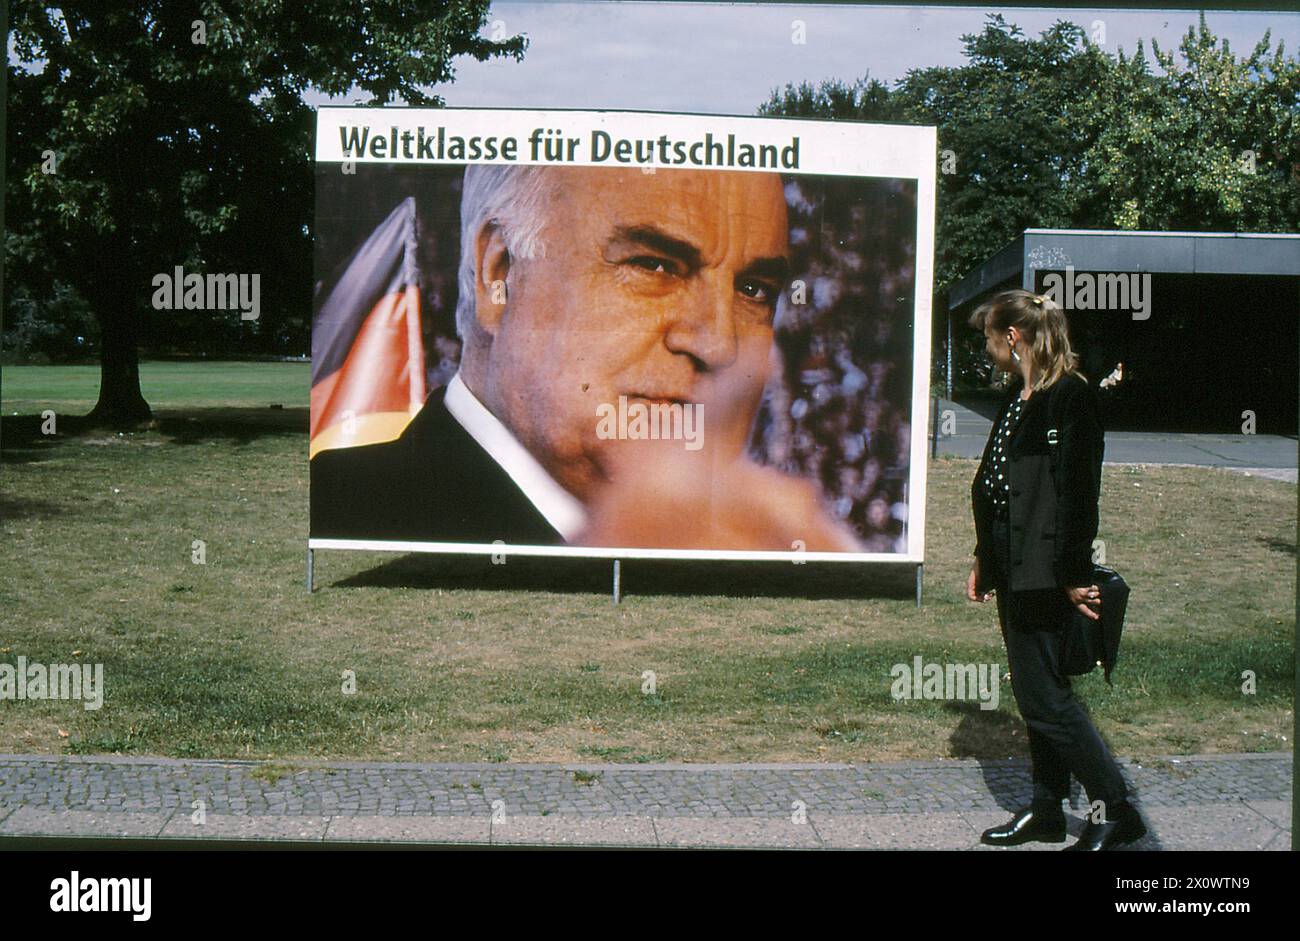 Berlin/Brandenburg/Germany/Billboards of Helmut Josef Michael Kohl, Geerman canchellor and leader of CDU been vandelized during general eelctions compiagn in Berlain and other billbaards are SPD are fine and people infront billboard in Berlin Brad nenburg Germany    (Photo.Francis Joseph Dean/Dean Pictures) Stock Photo